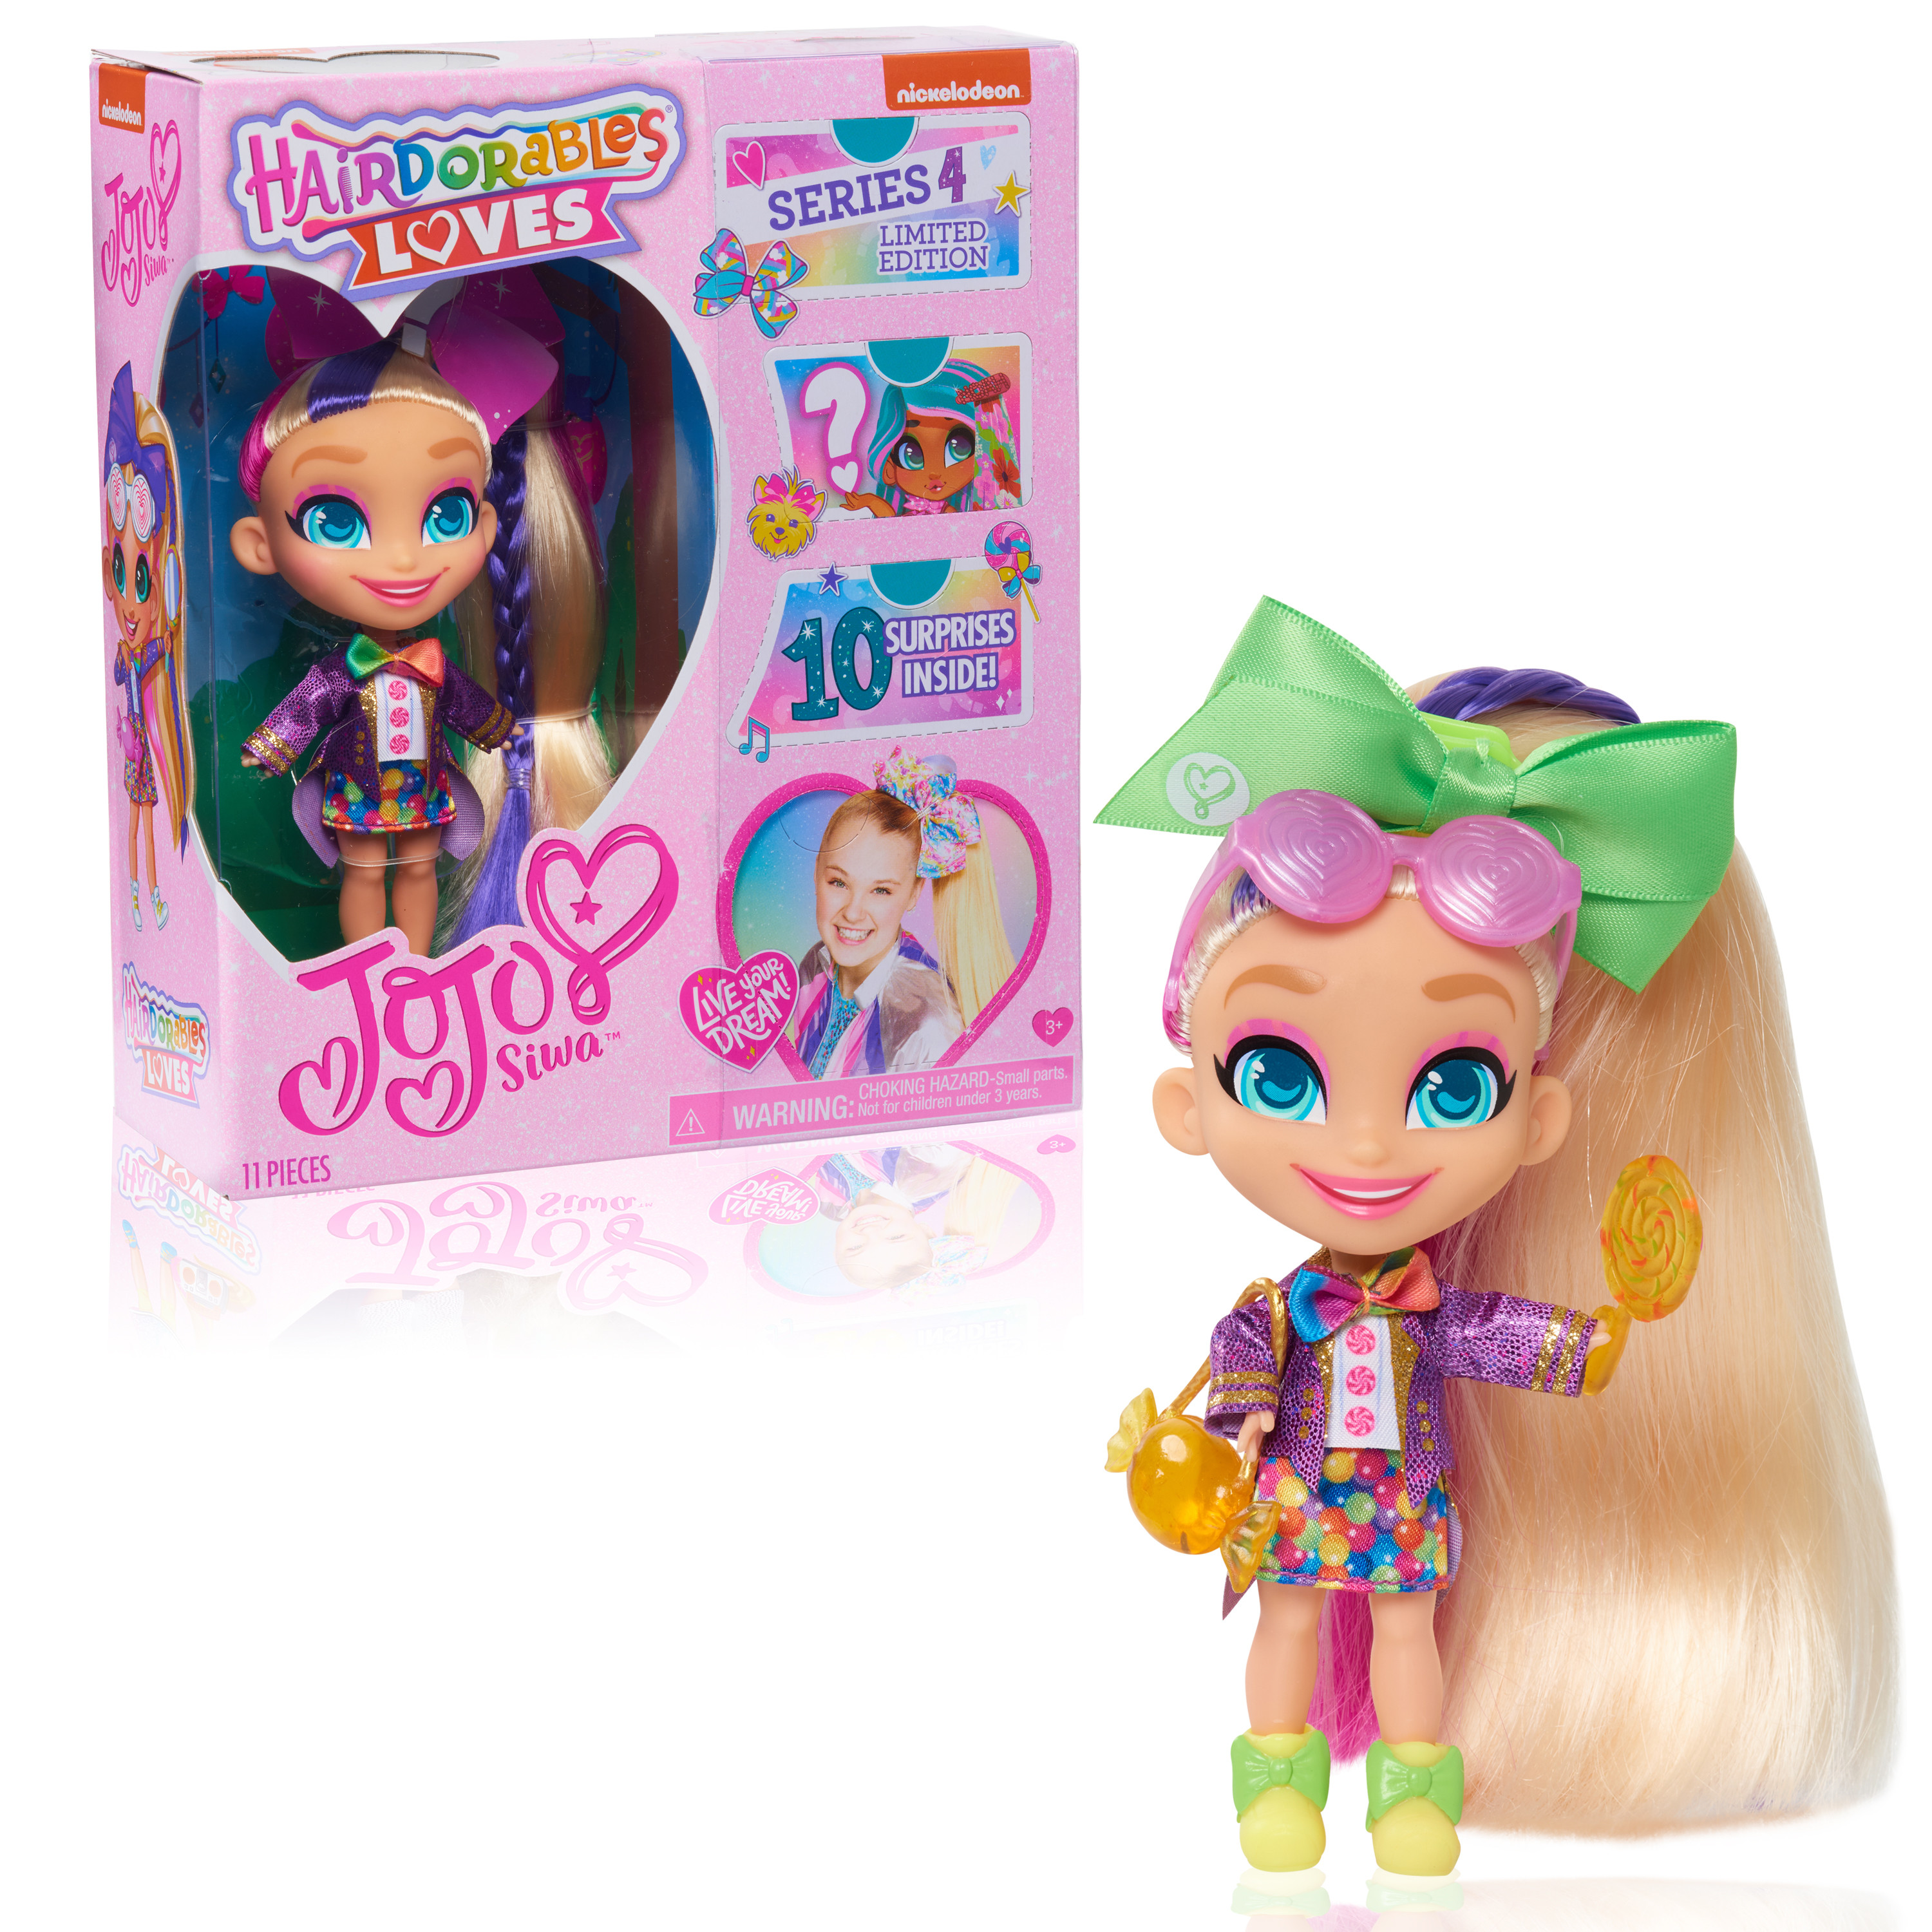 JoJo Siwa Hairdorables Loves JoJo Limited Edition Collectible Doll, Series 4, Candy Time, Includes 10 Surprises,  Kids Toys for Ages 3 Up, Gifts and Presents - image 1 of 6